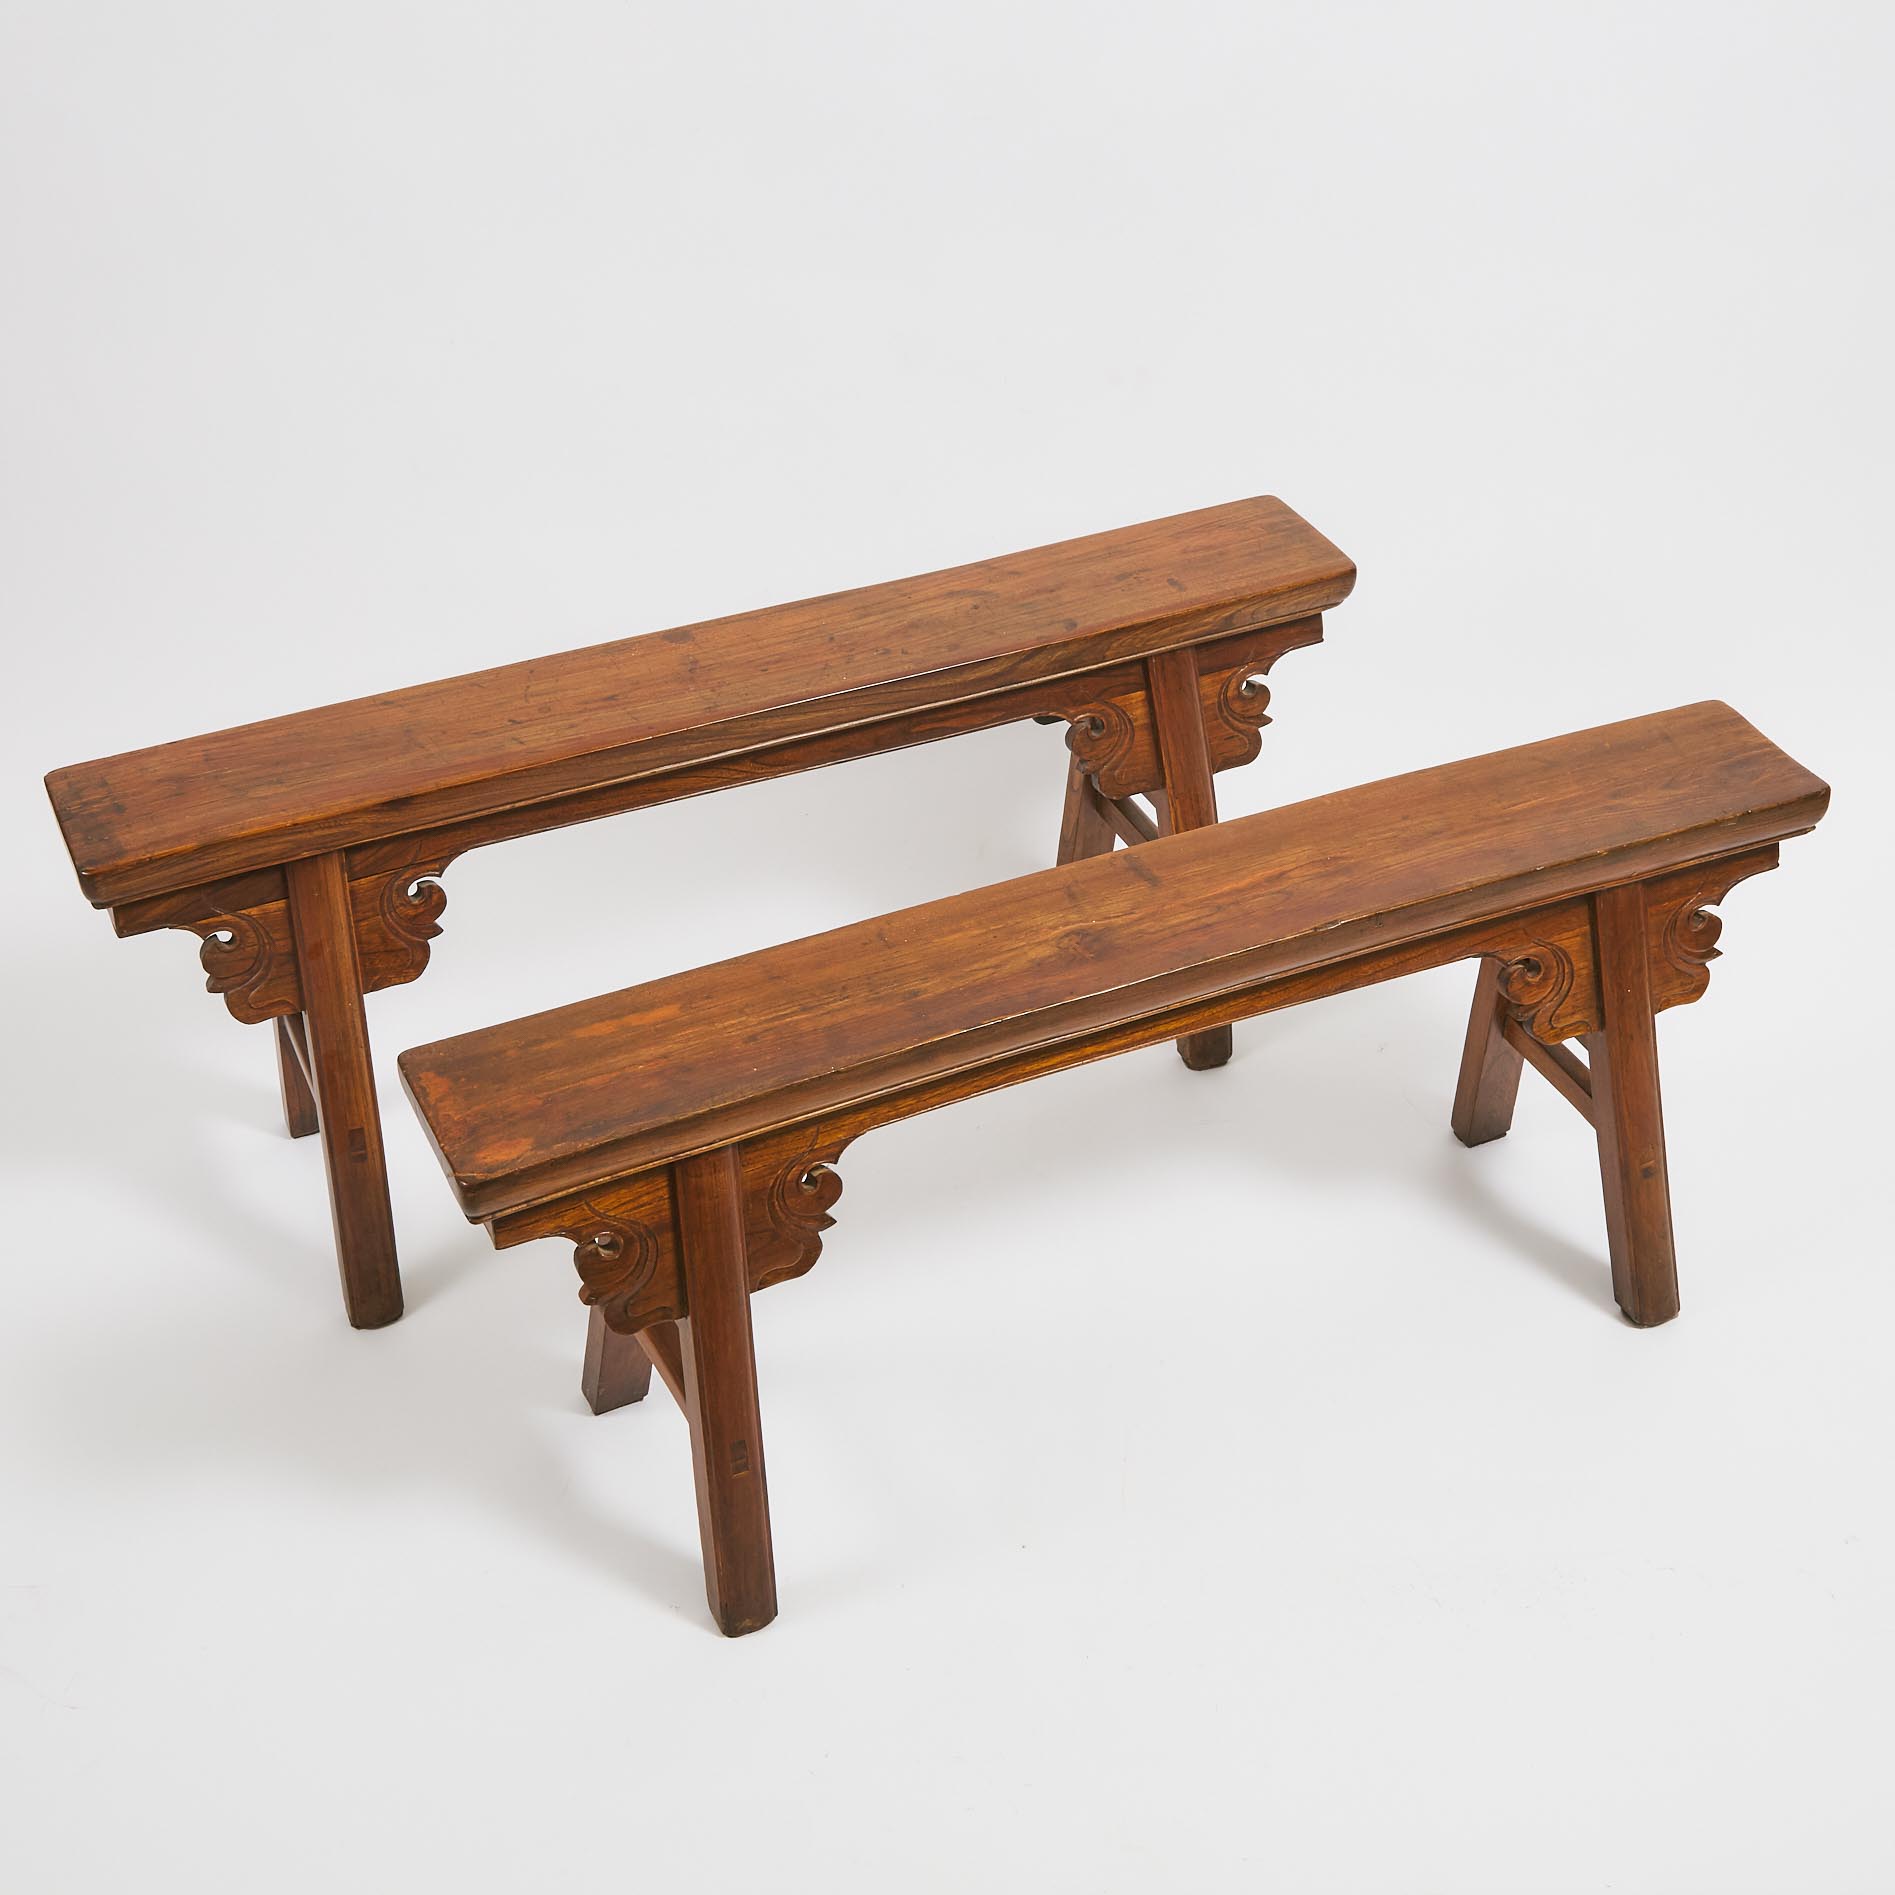 A Pair of Chinese Huali Low Benches, 19th Century